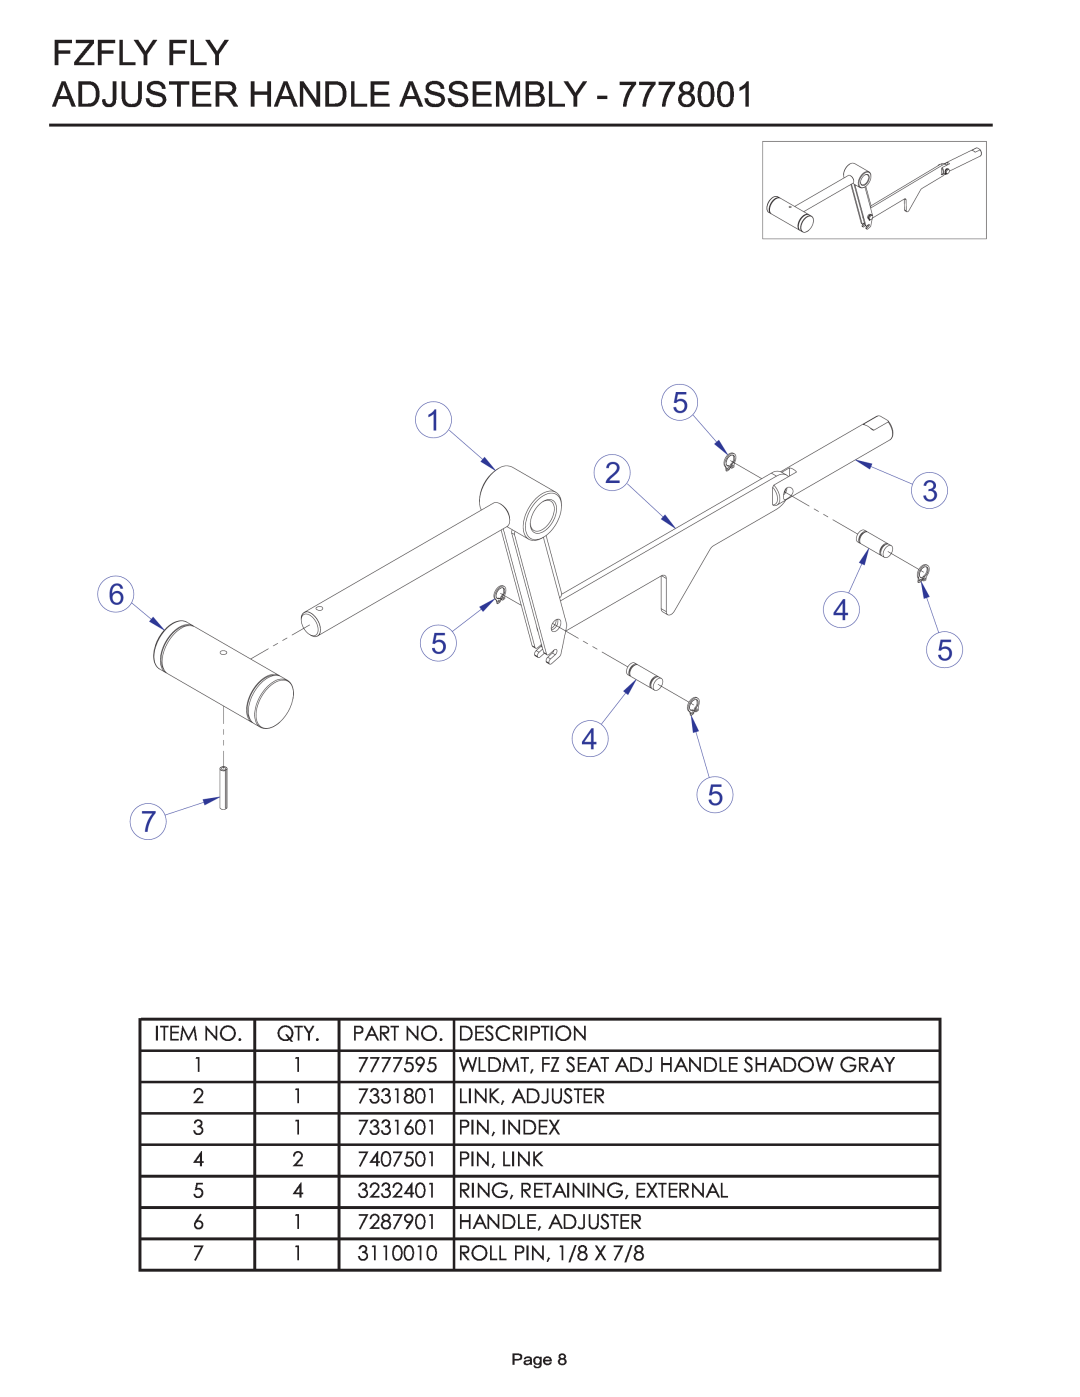 Life Fitness manual Fzfly Fly Adjuster Handle Assembly 